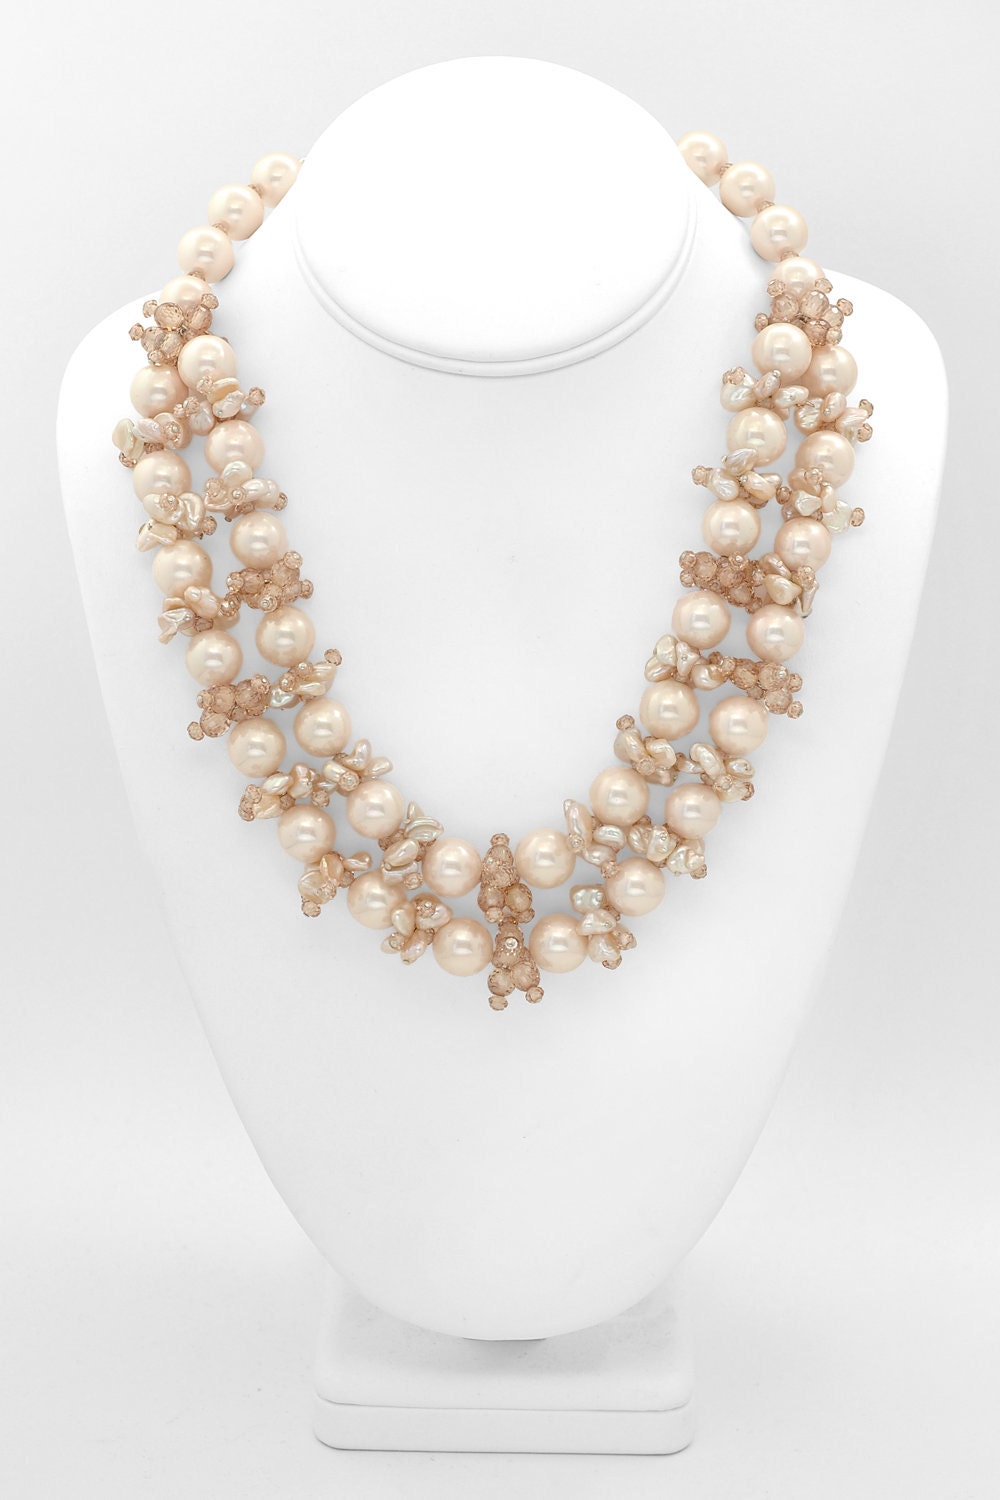 Peach Cluster Necklace